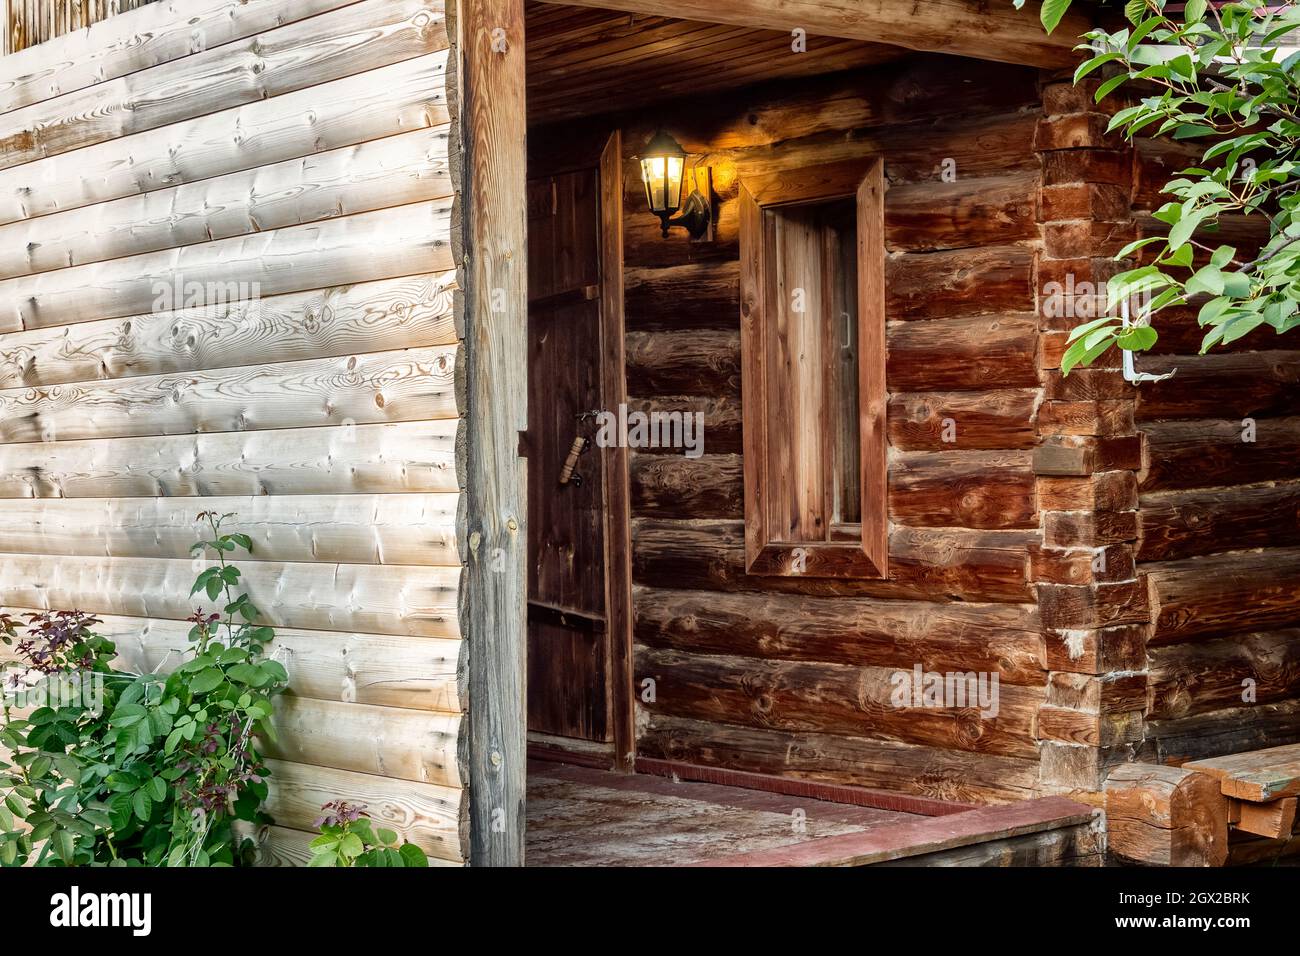 An old Russian wooden bathhouse in the backyard. Stock Photo